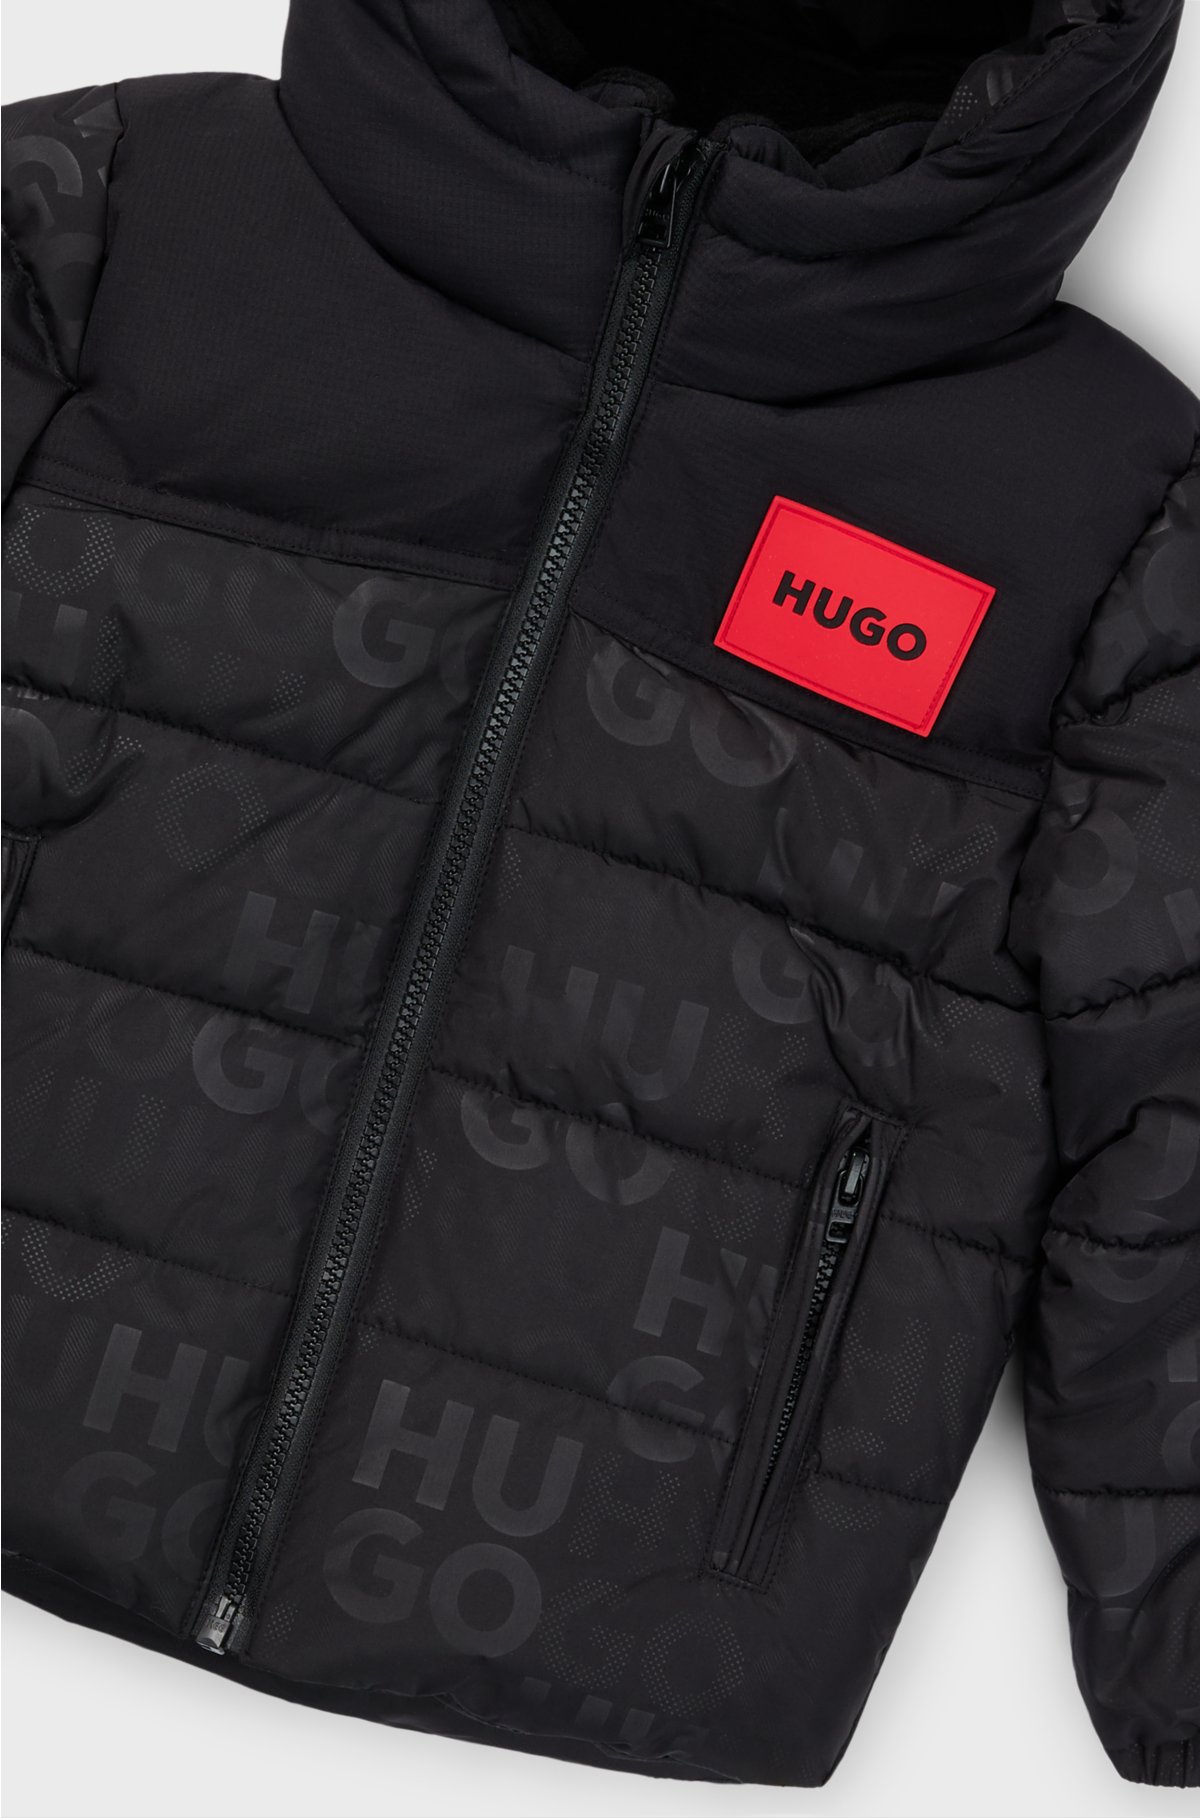 Kids' hooded puffer jacket with red logo label, Black